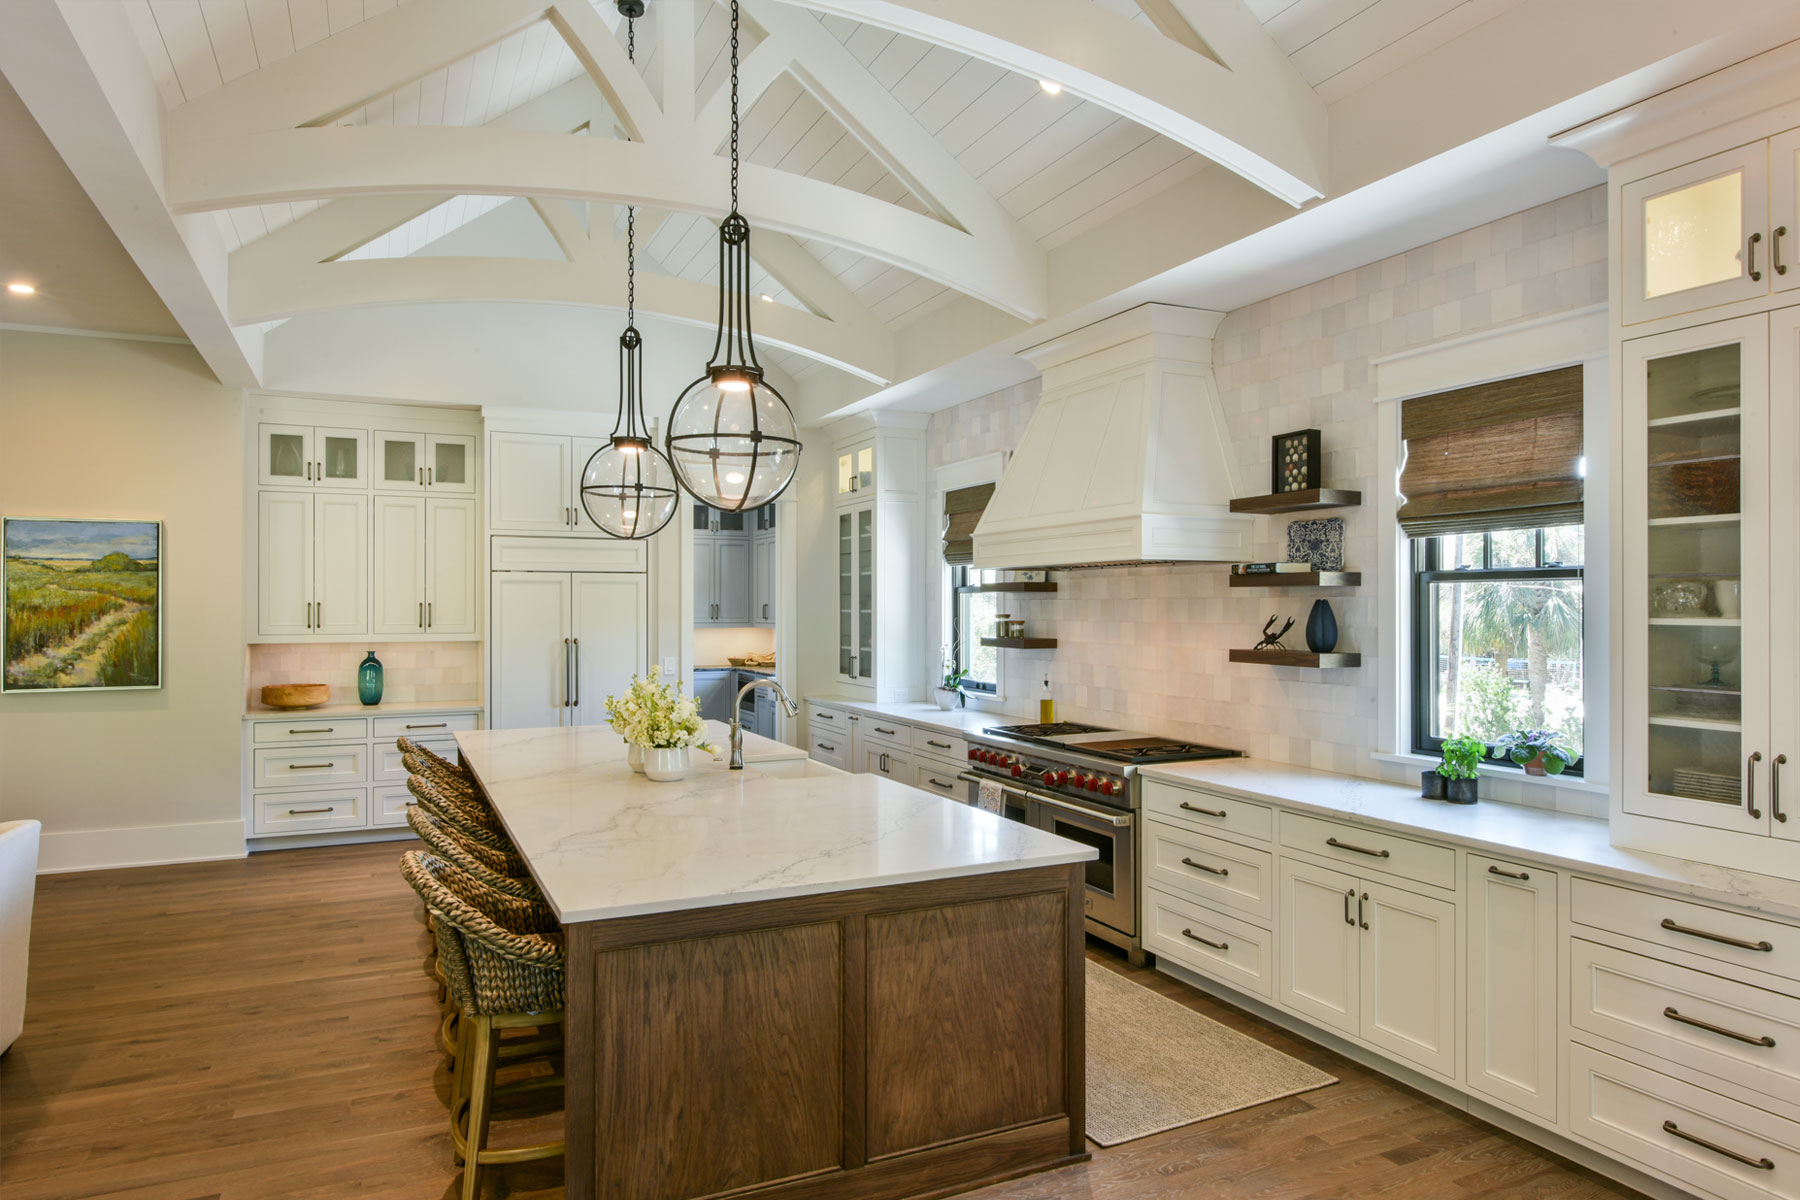 Coastal kitcehn with white cabinets and exposed trusses